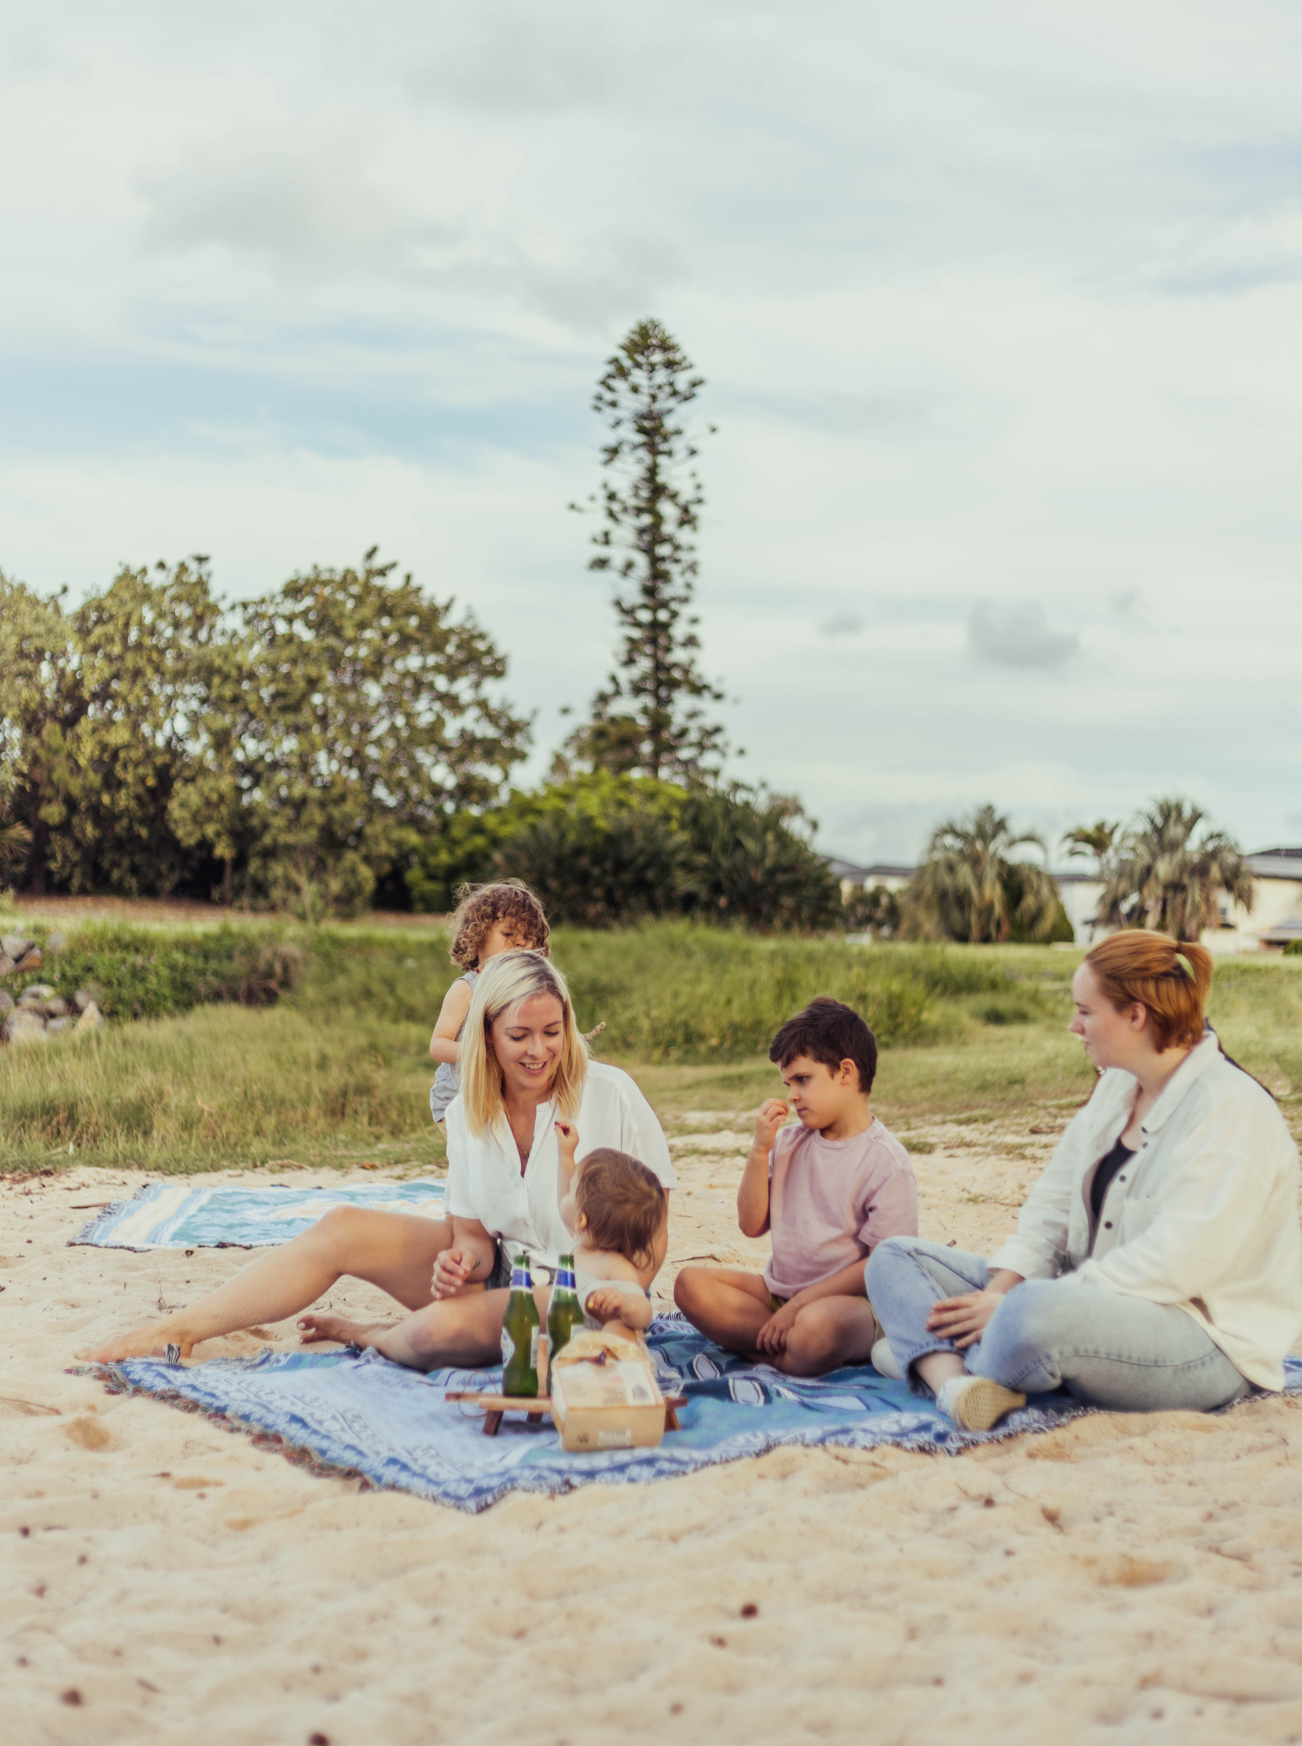 Shooting Stars blue throw rug, picnic blanket laying on beach in Brisbane as family plays and has a picnic. Designed in Aus.